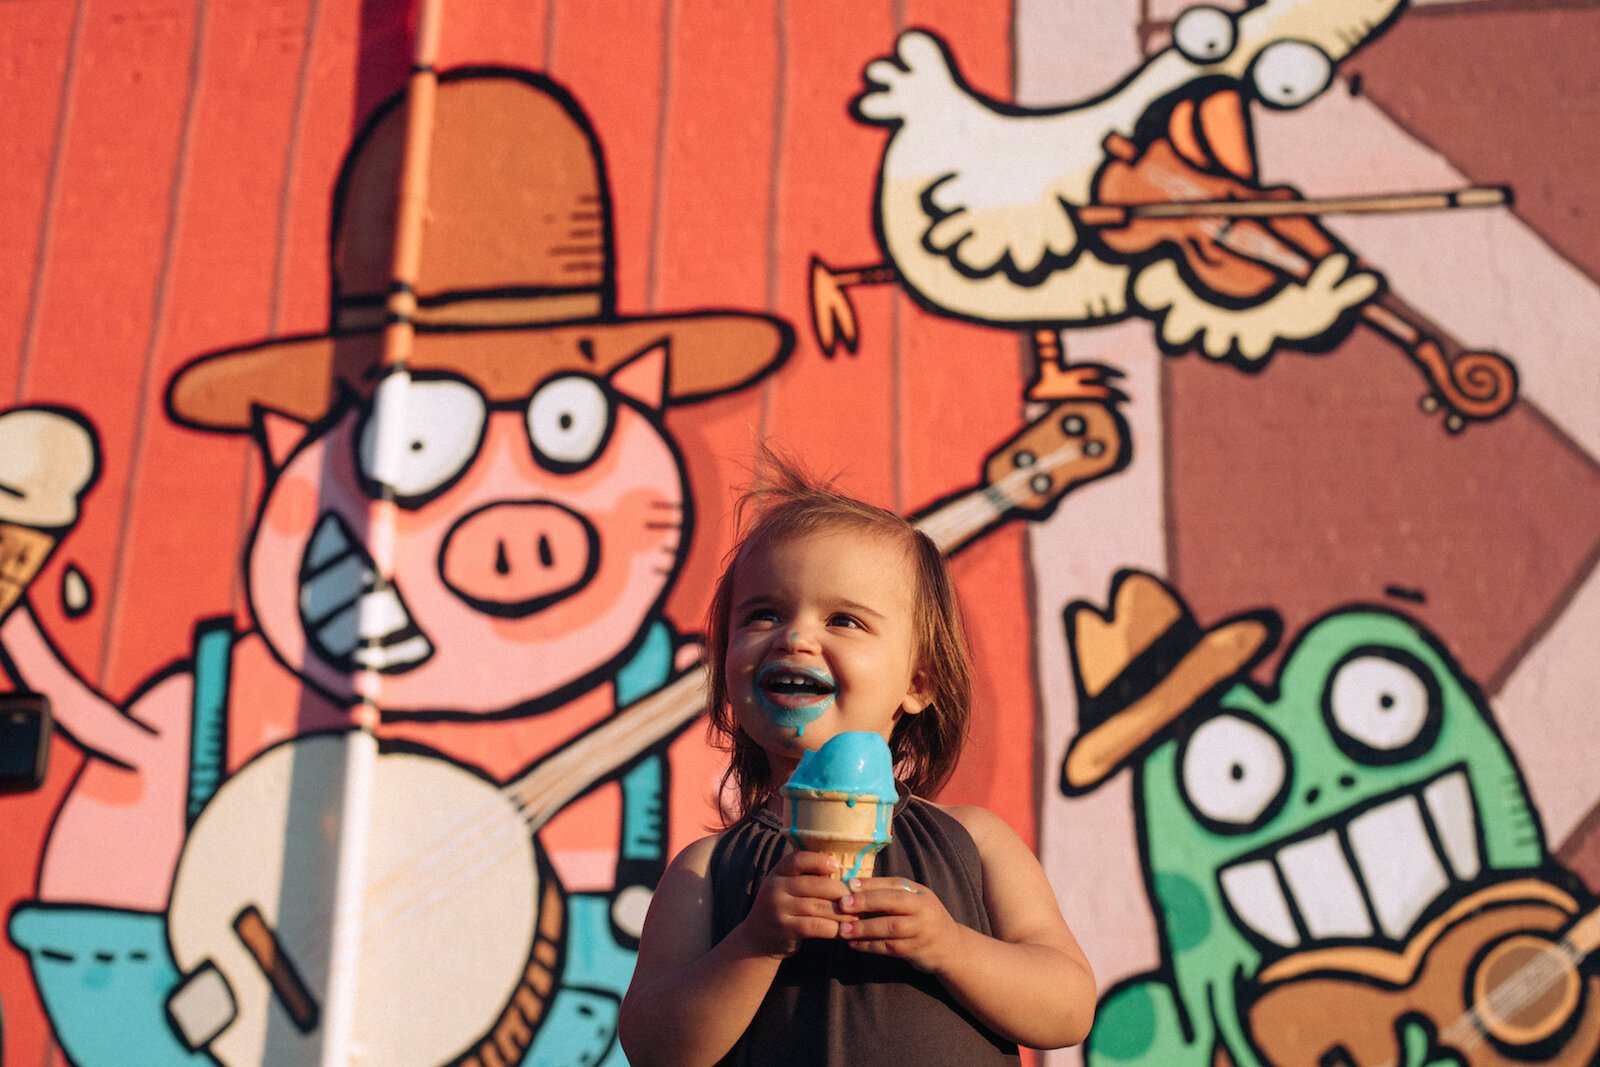 The Ice Cream Vault on Main Street in Andrews features a mural of a Farmyard Hoedown by Bryan Ballinger.